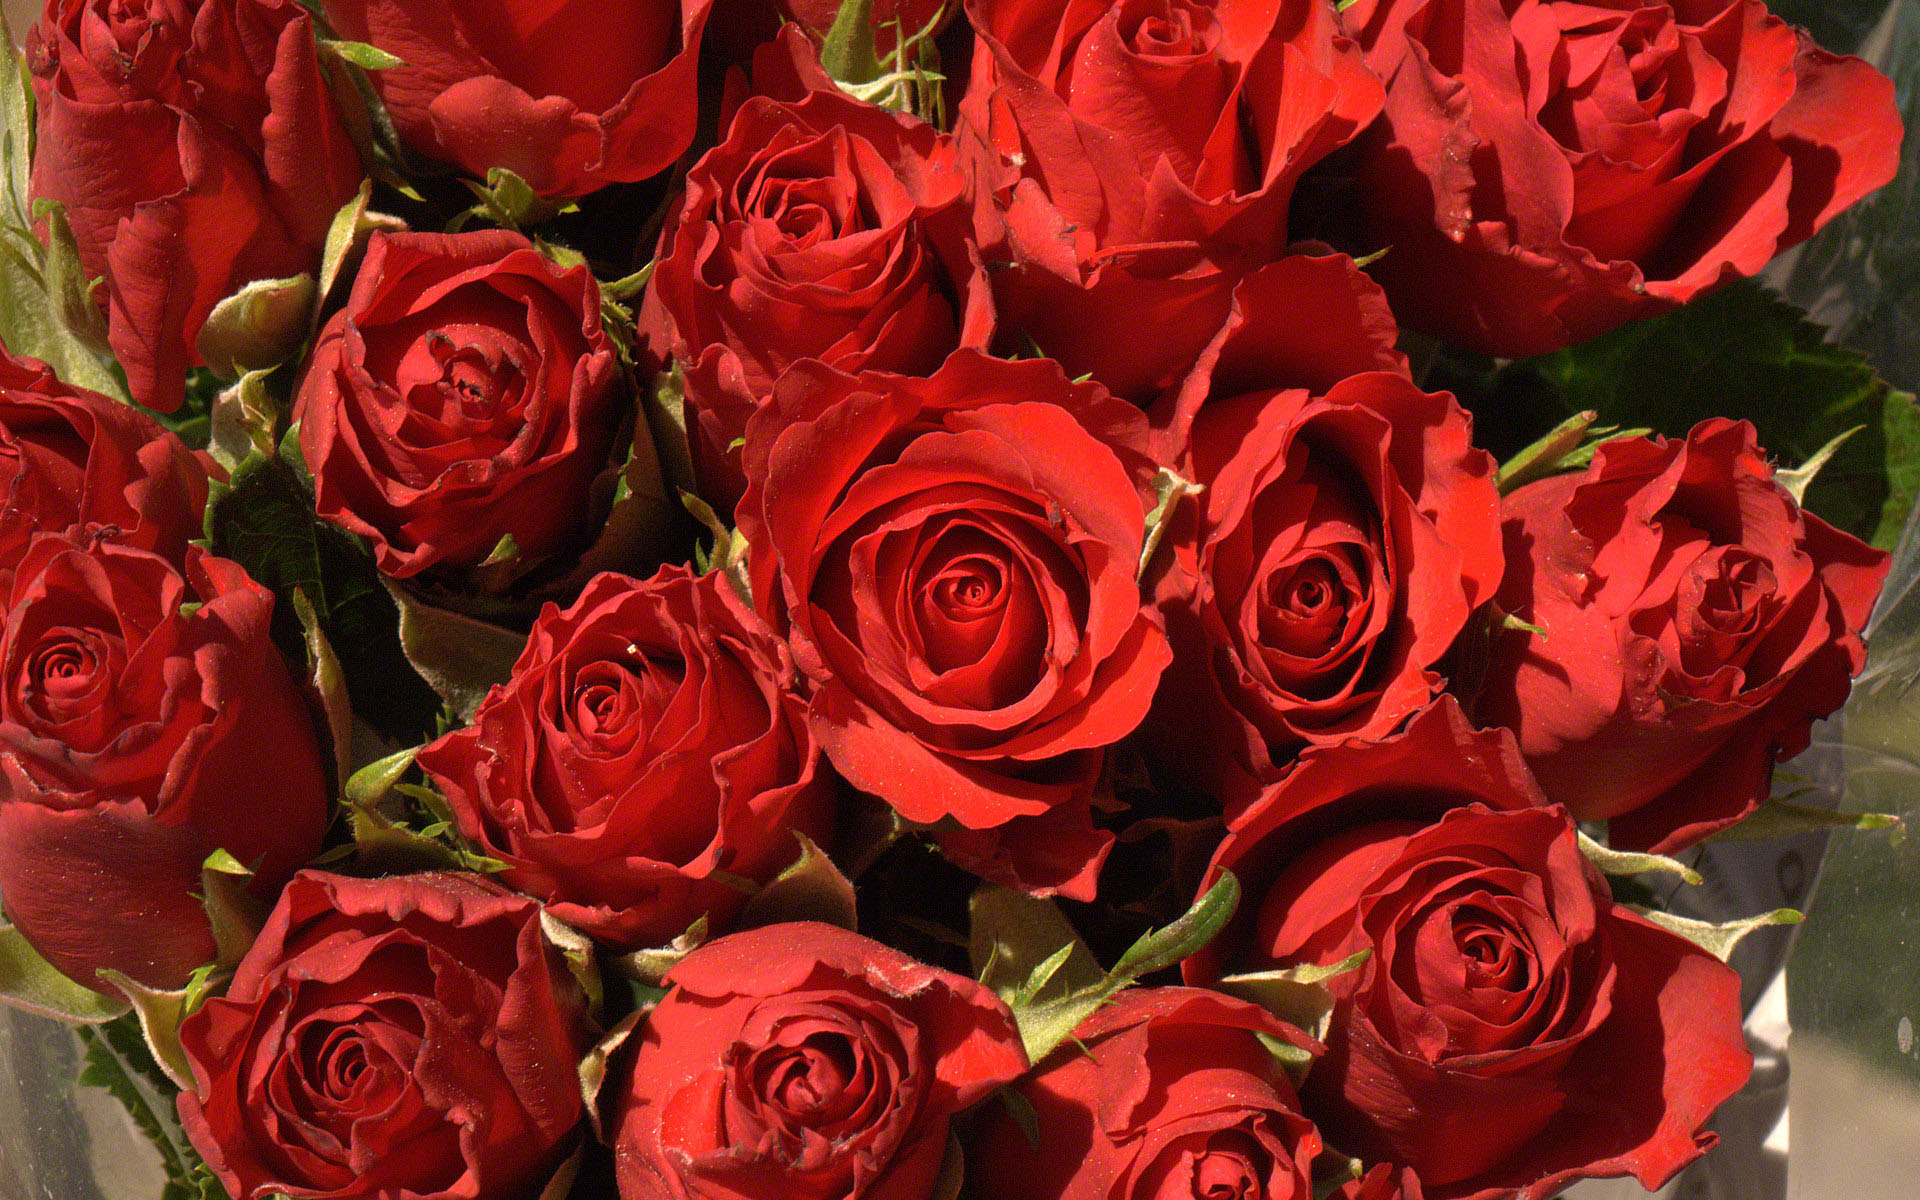 National Red Rose Day - Celebrate the Timeless Beauty of the Queen